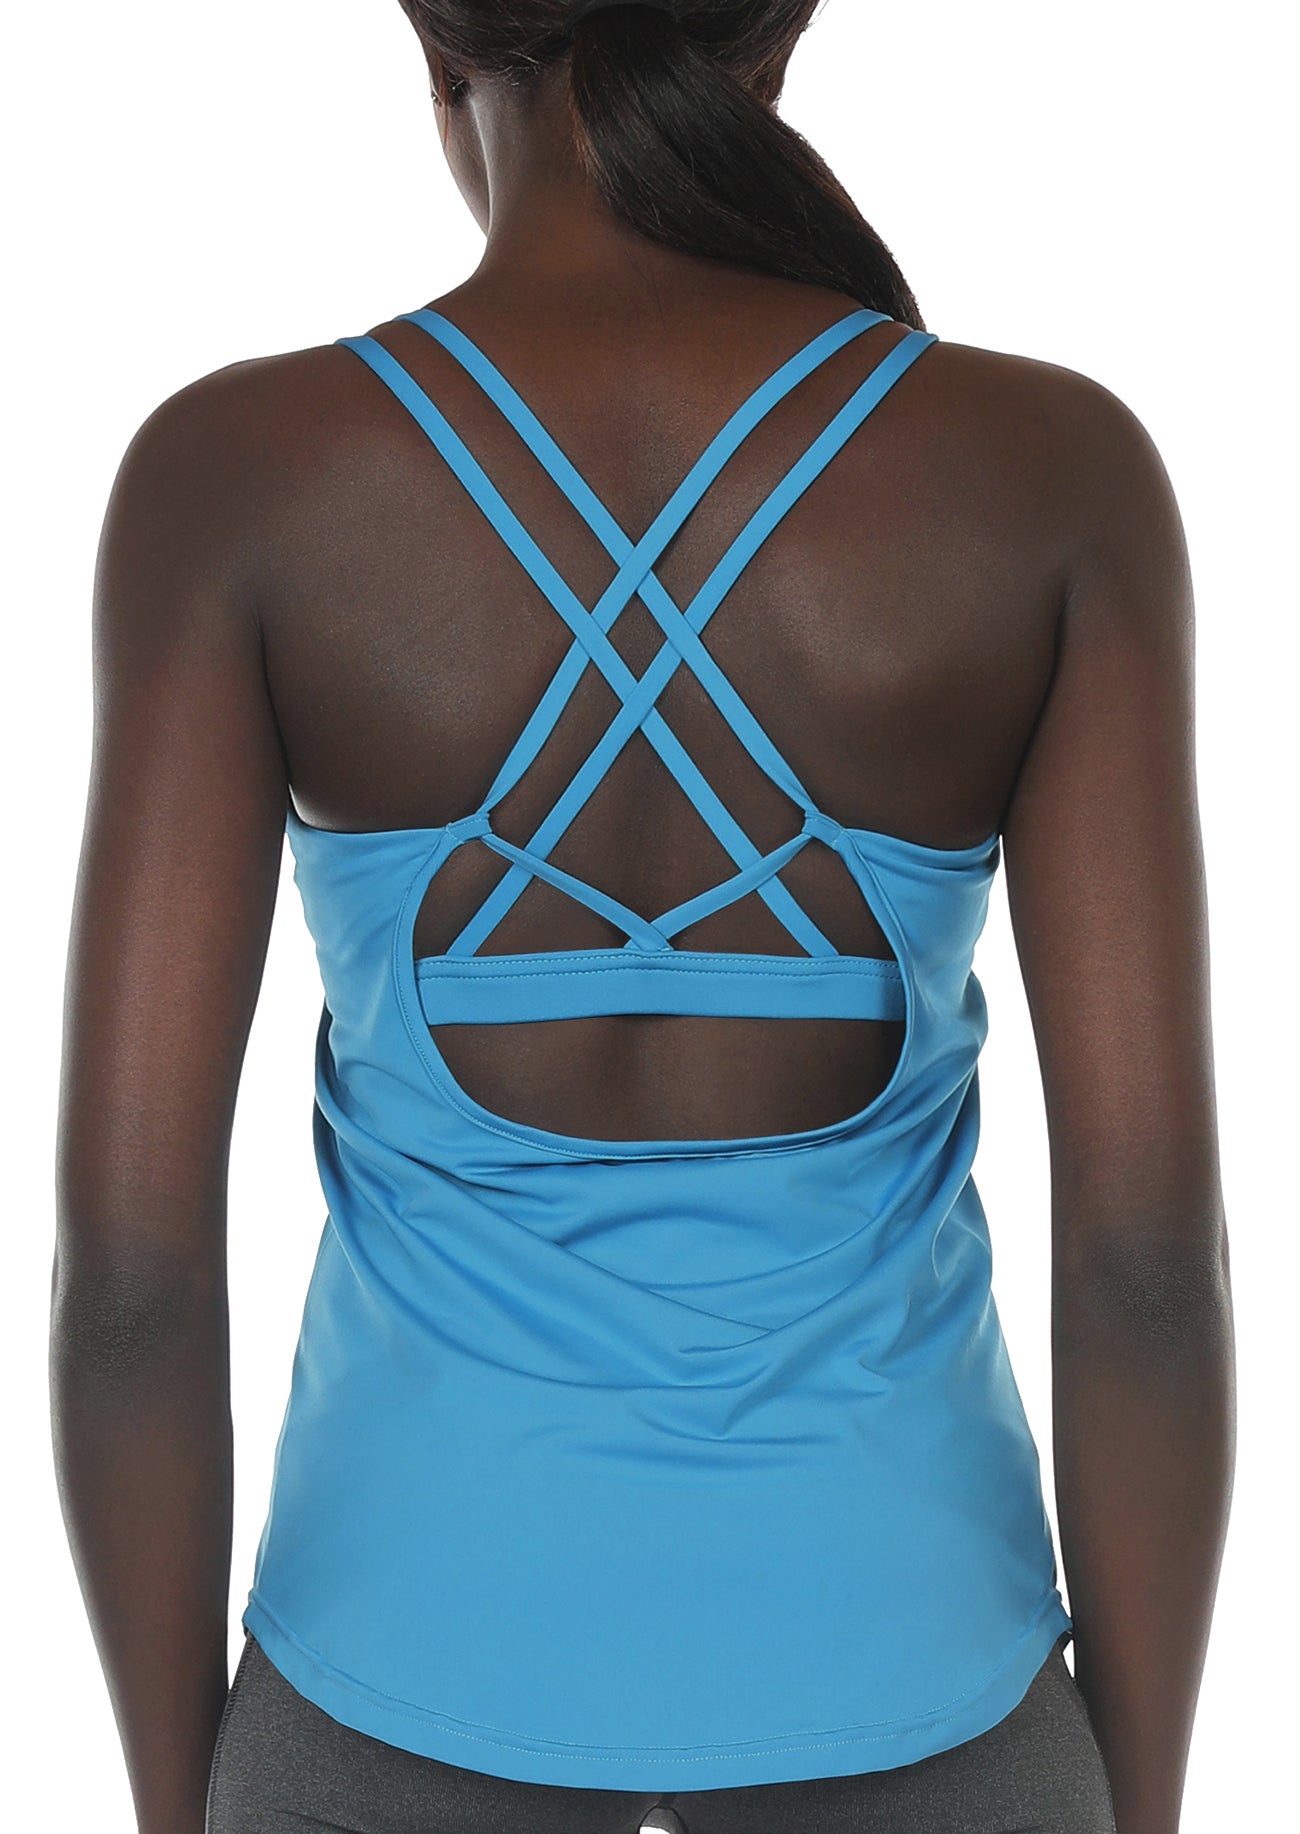 icyzone Workout Tank Tops Built in Bra - Women's Strappy Athletic Yoga  Tops, Running Exercise Gym Shirts